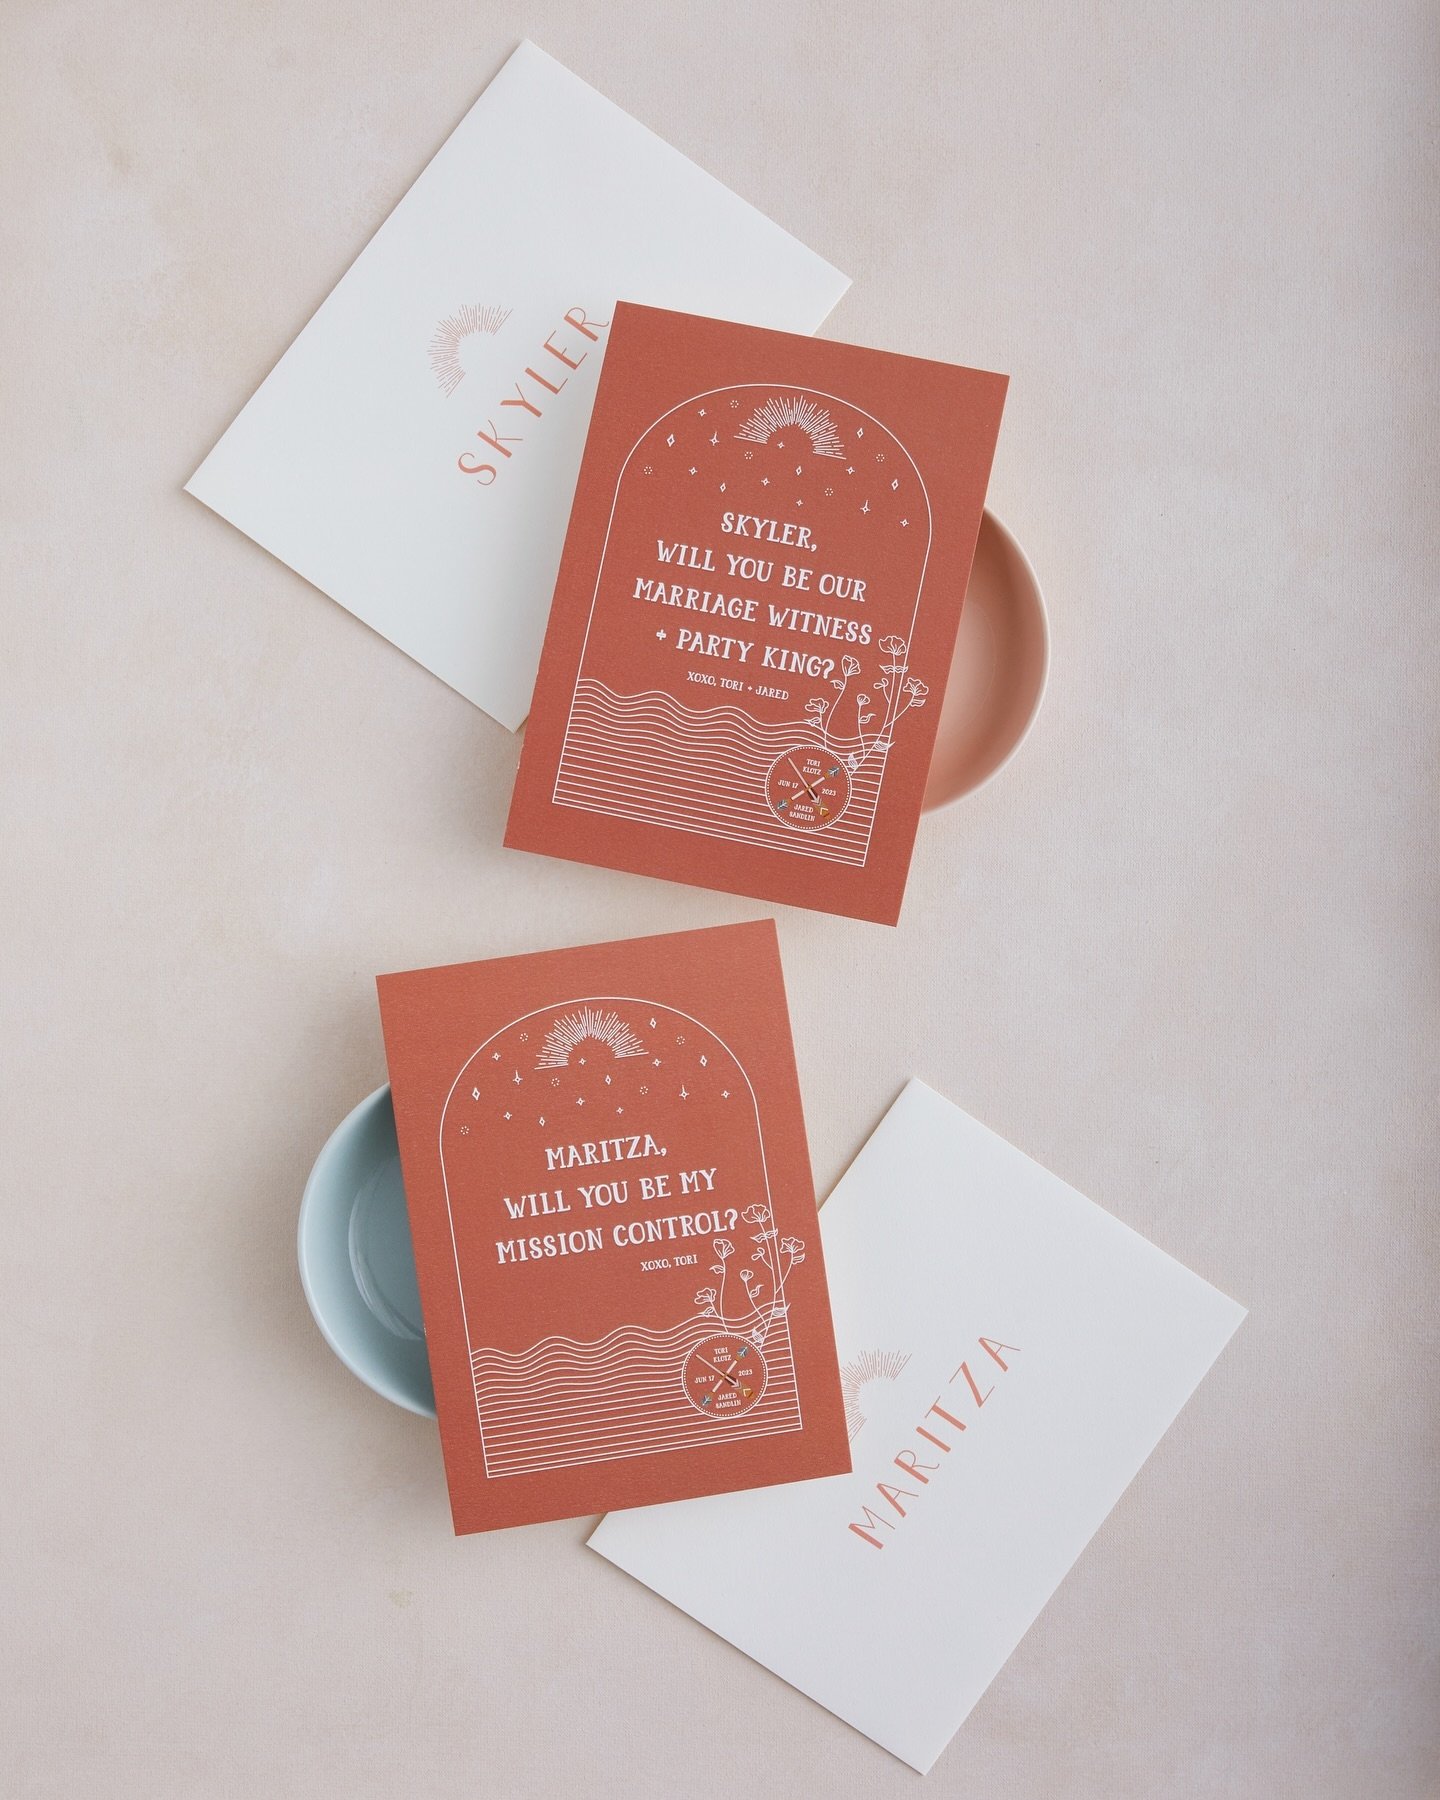 When you want to ask your people to be part of your wedding party, you order personalized cards 💌 Many of the elements  in these cards carried over to the save the date, invitations and day of stationery too!

#paperlove #weddingpaper #weddingpaperg